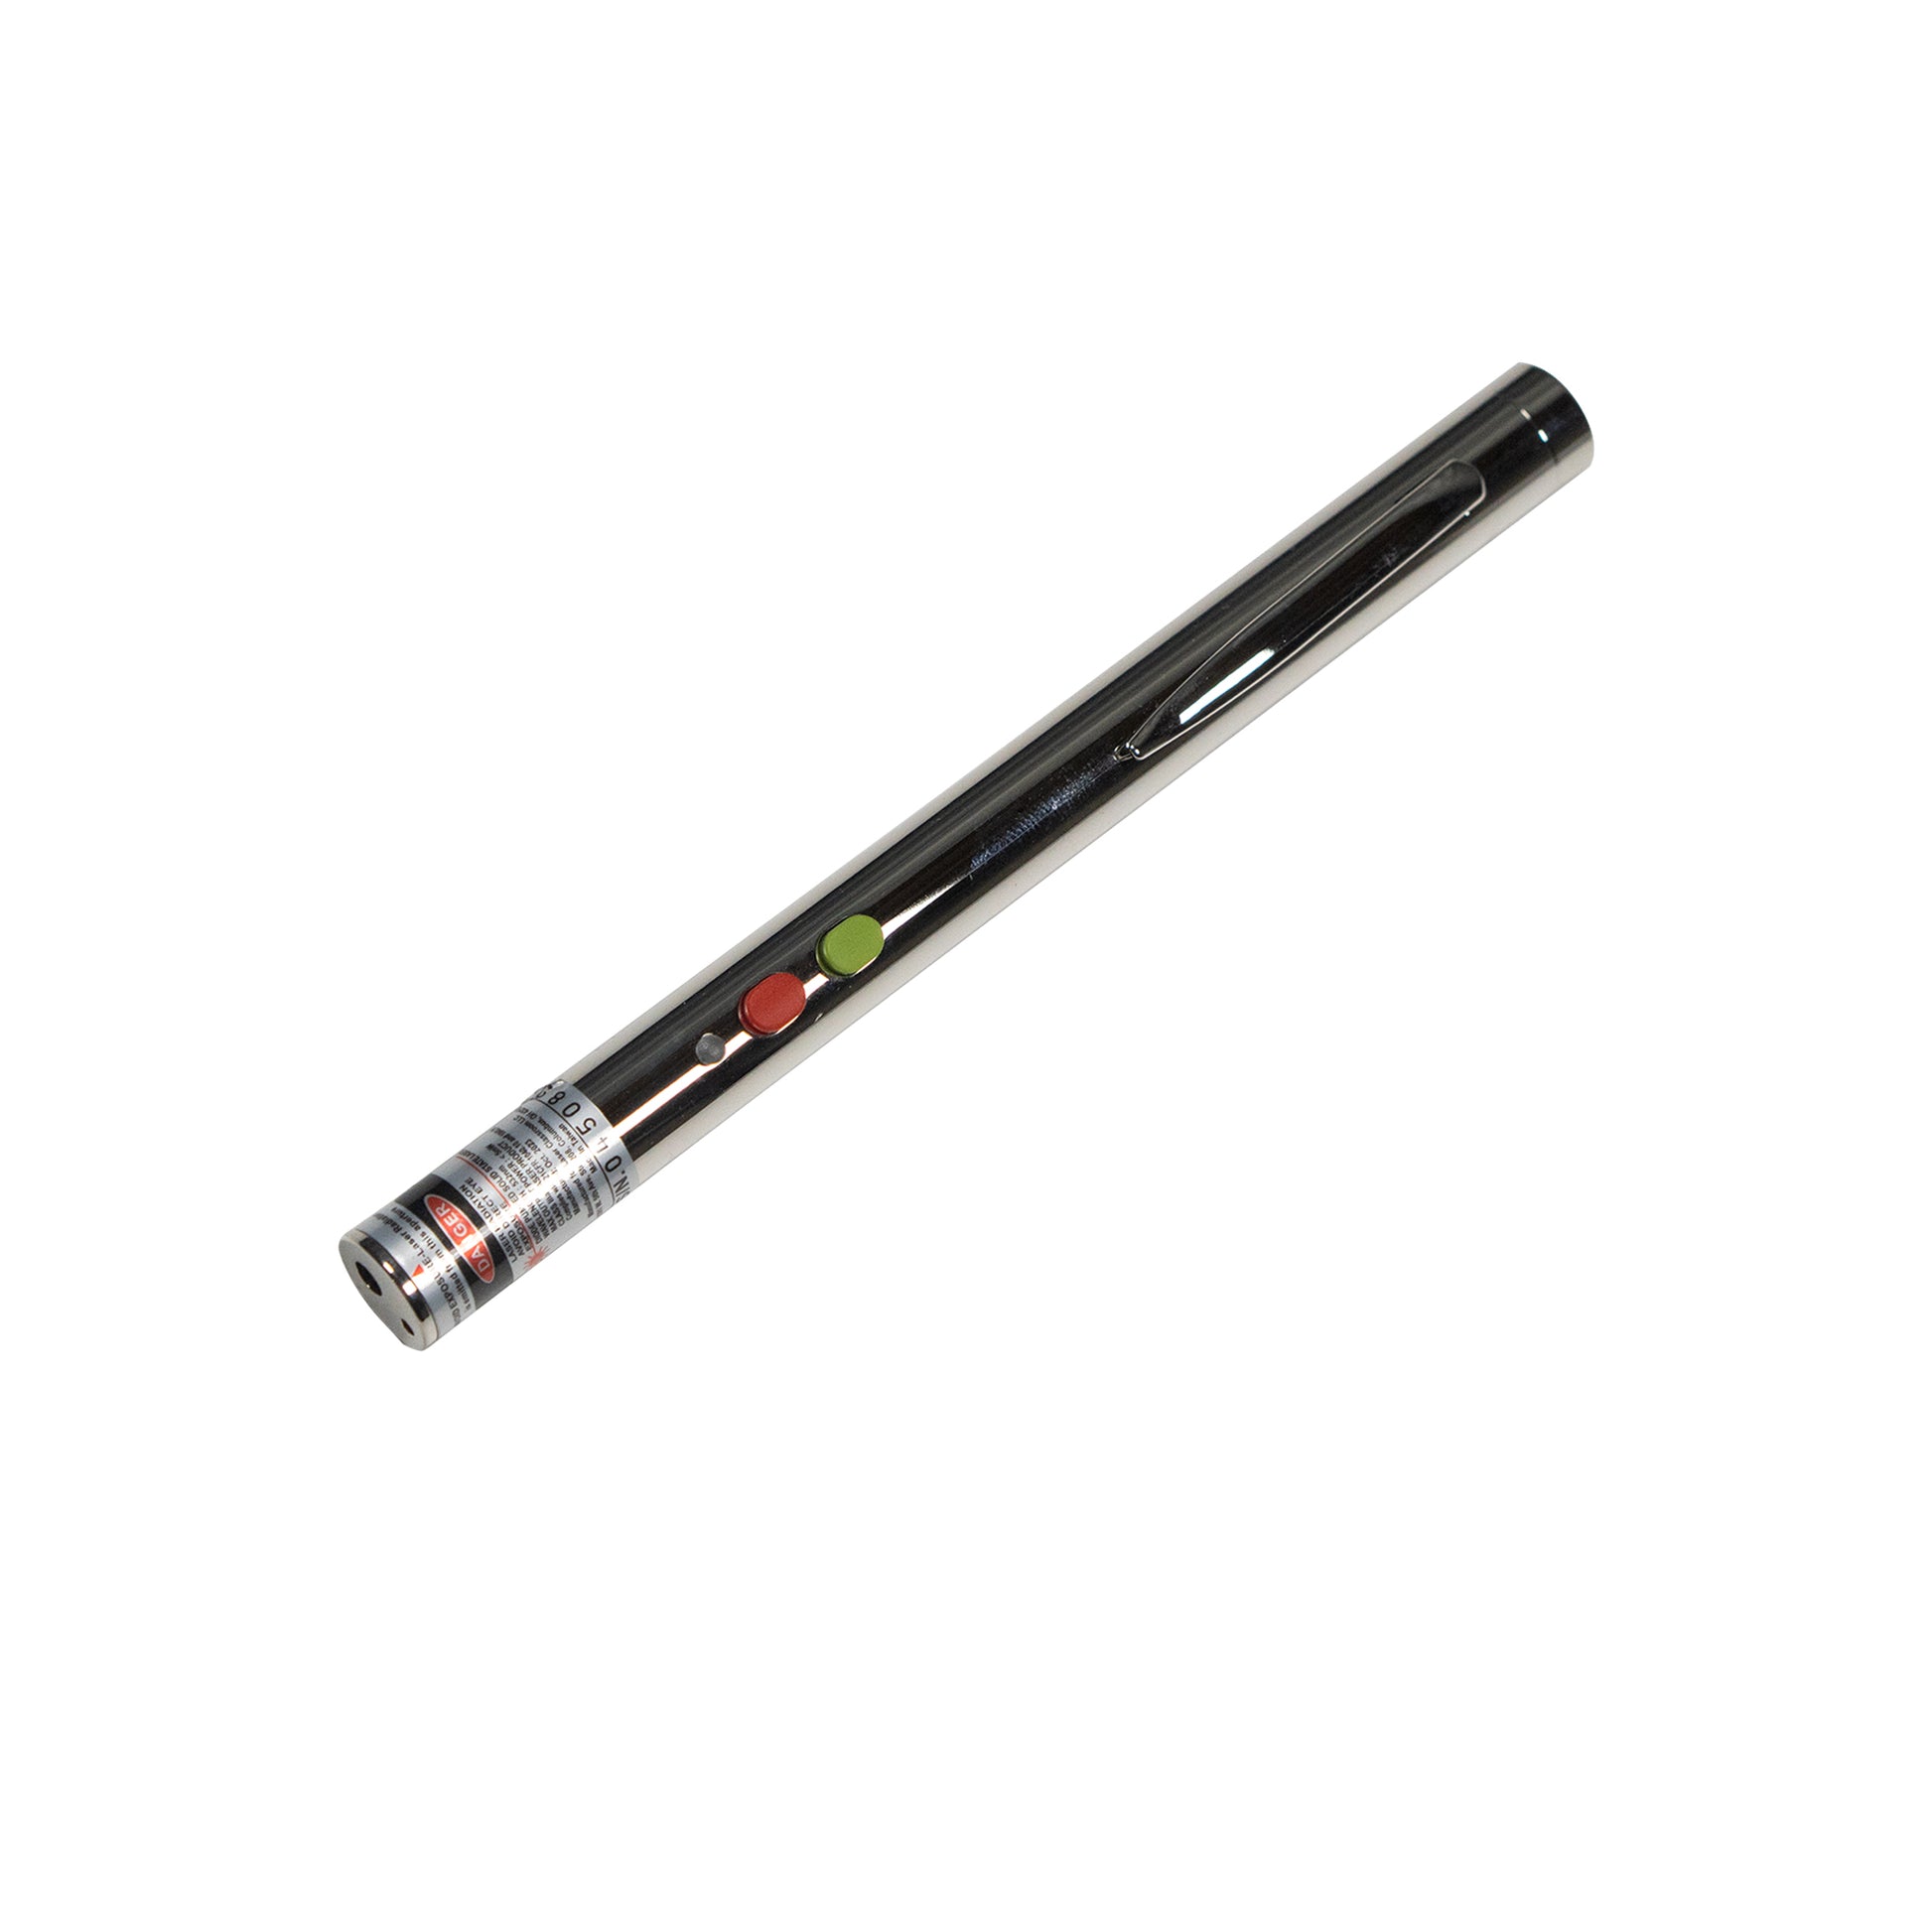 Laser Pointer Pen Smart Style Red & Green Laser Small 2 PCS : High Power  Burning Laser Pointers,DPSS Laser Diode LD Modules, Kinds of laser products